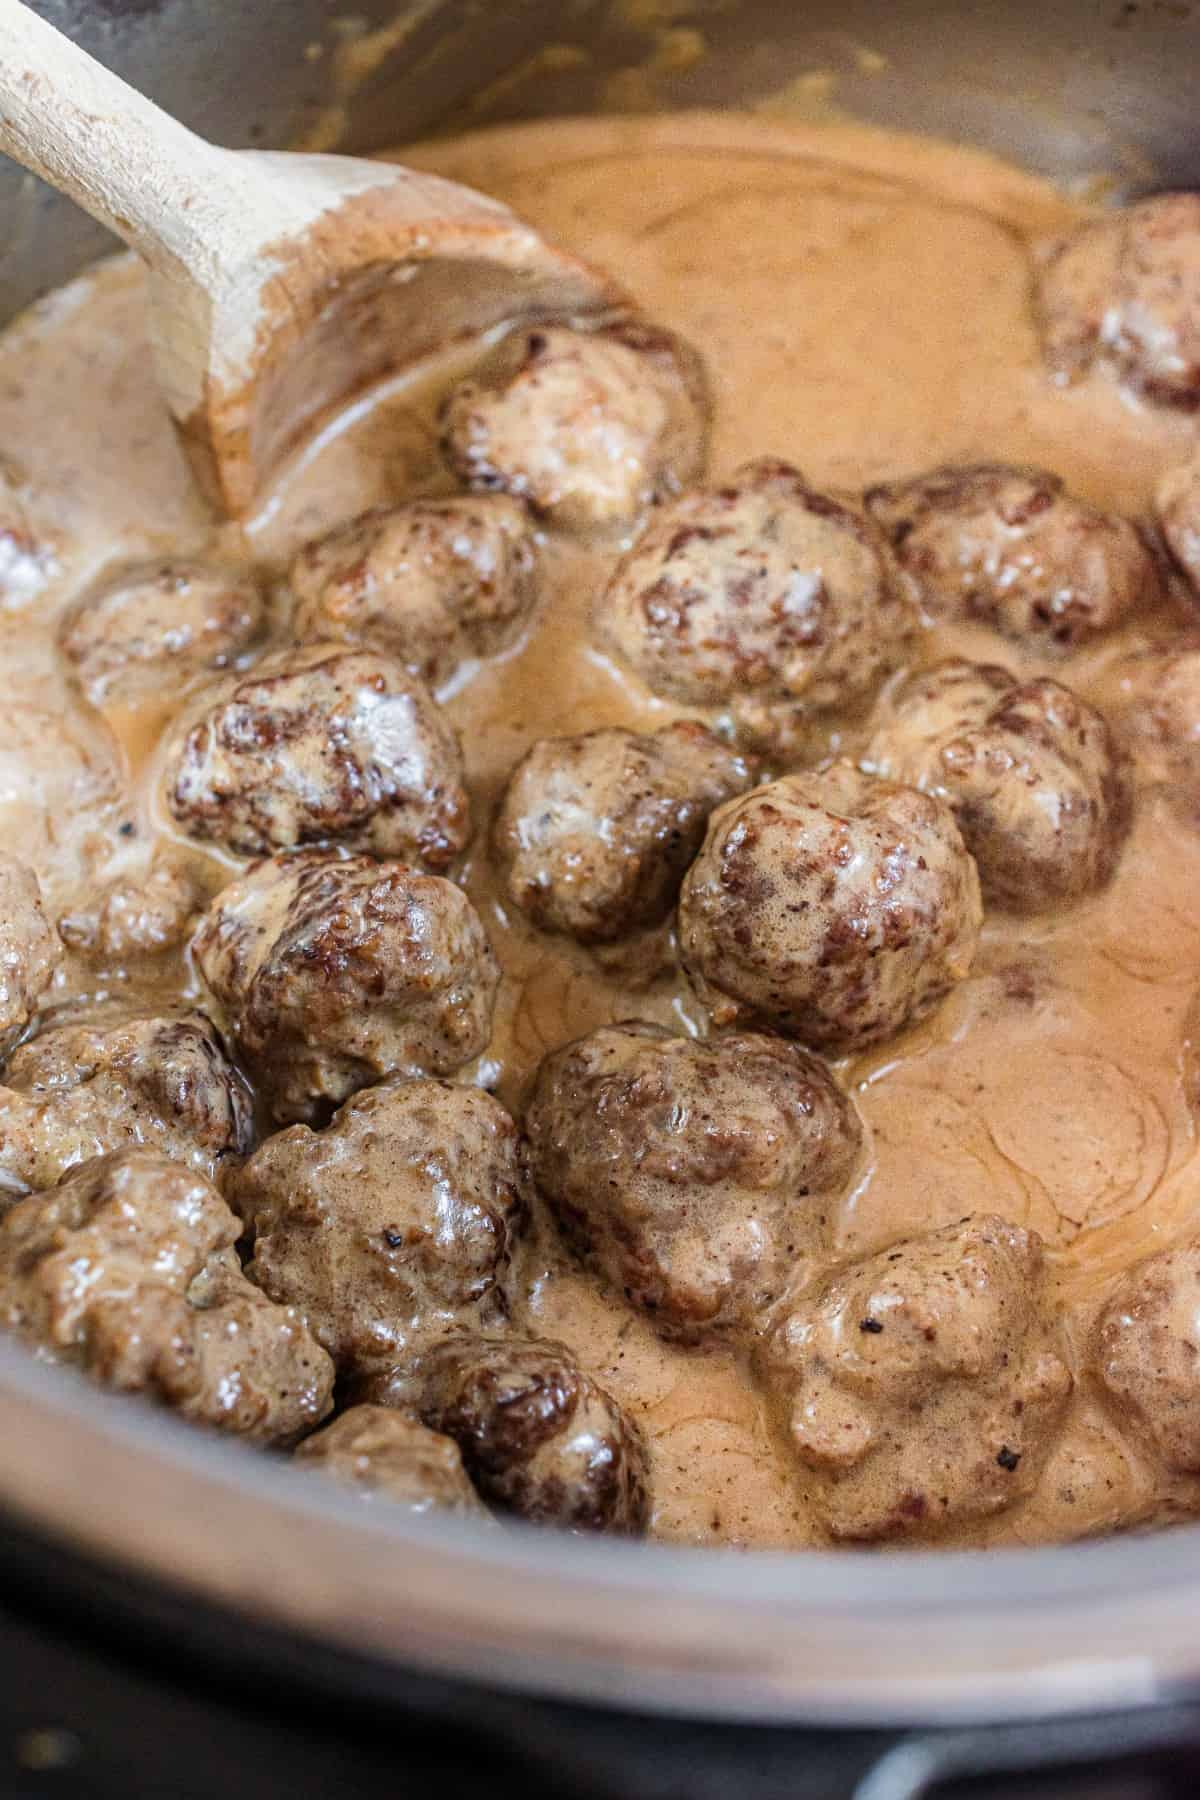 Swedish meatballs in the pressure cooker being stirred with a wooden spoon.